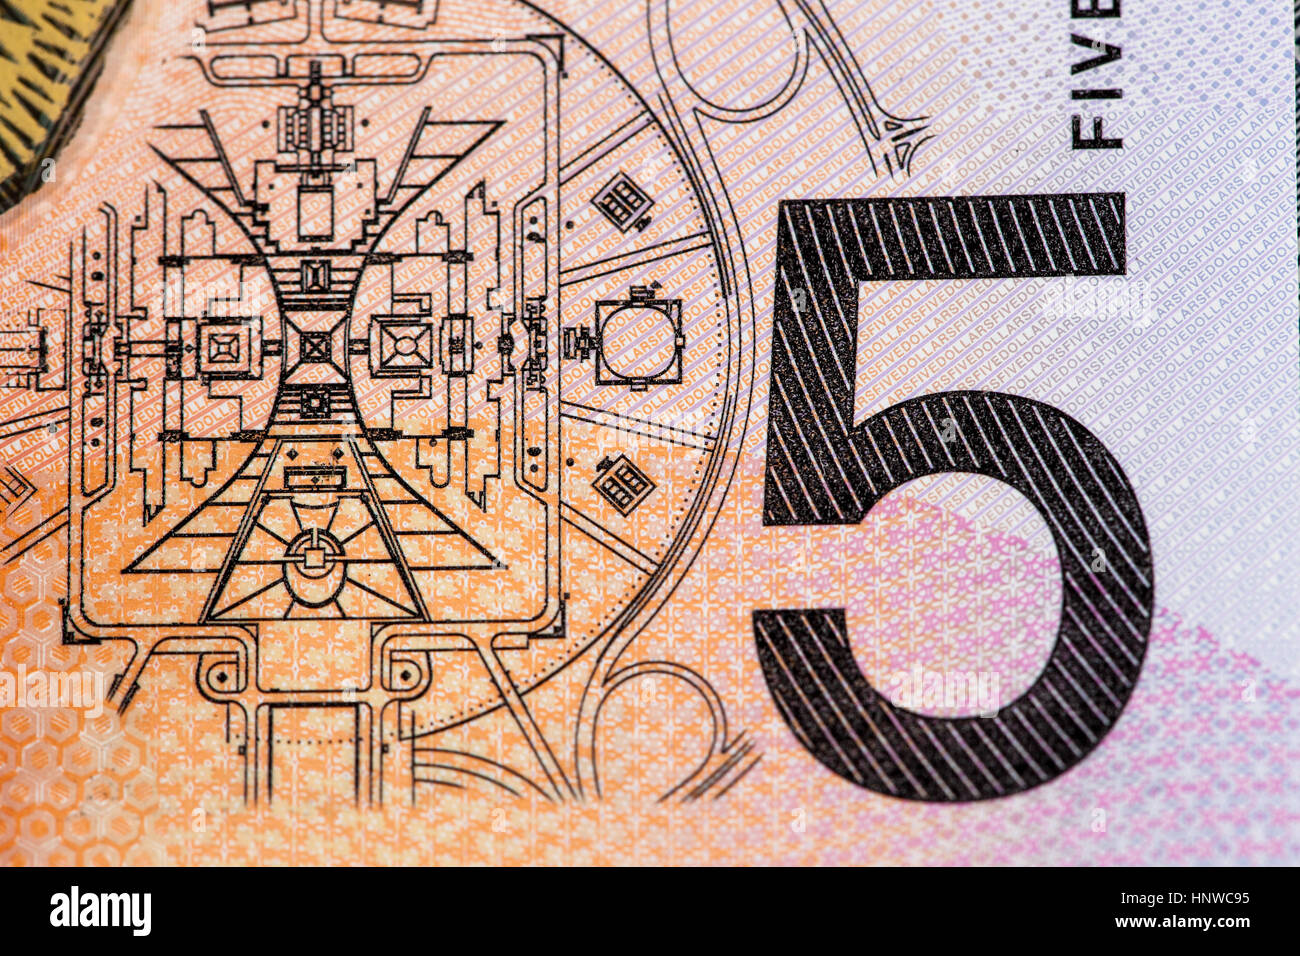 Australian 5 dollar bill fragment closeup showing the Parliament House in Canberra Stock Photo